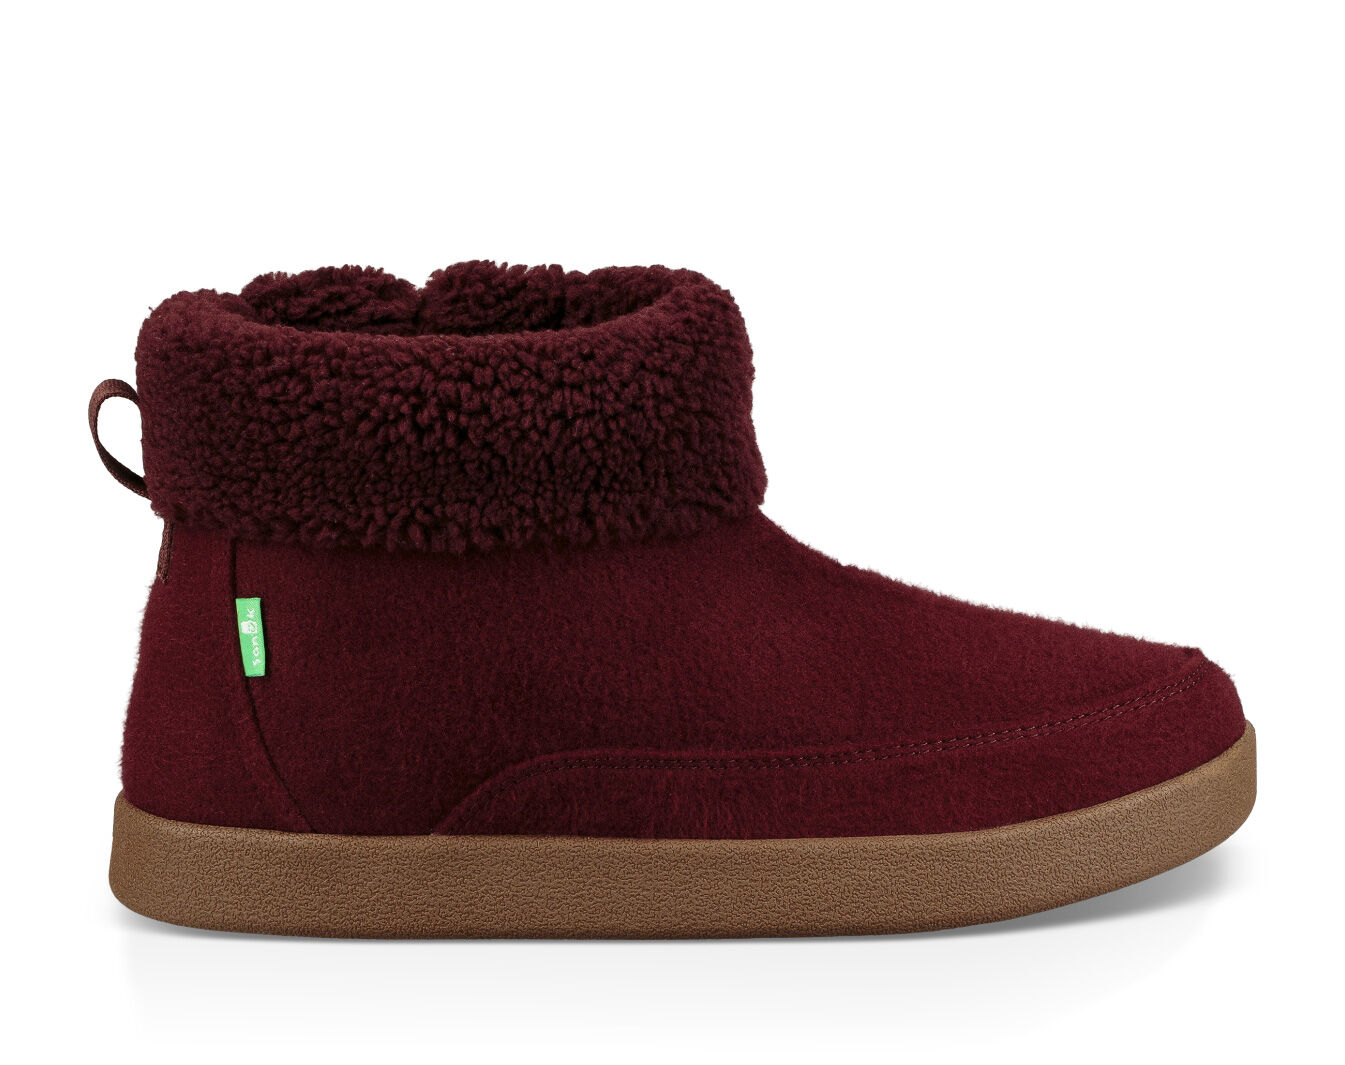 knock off ugg slippers